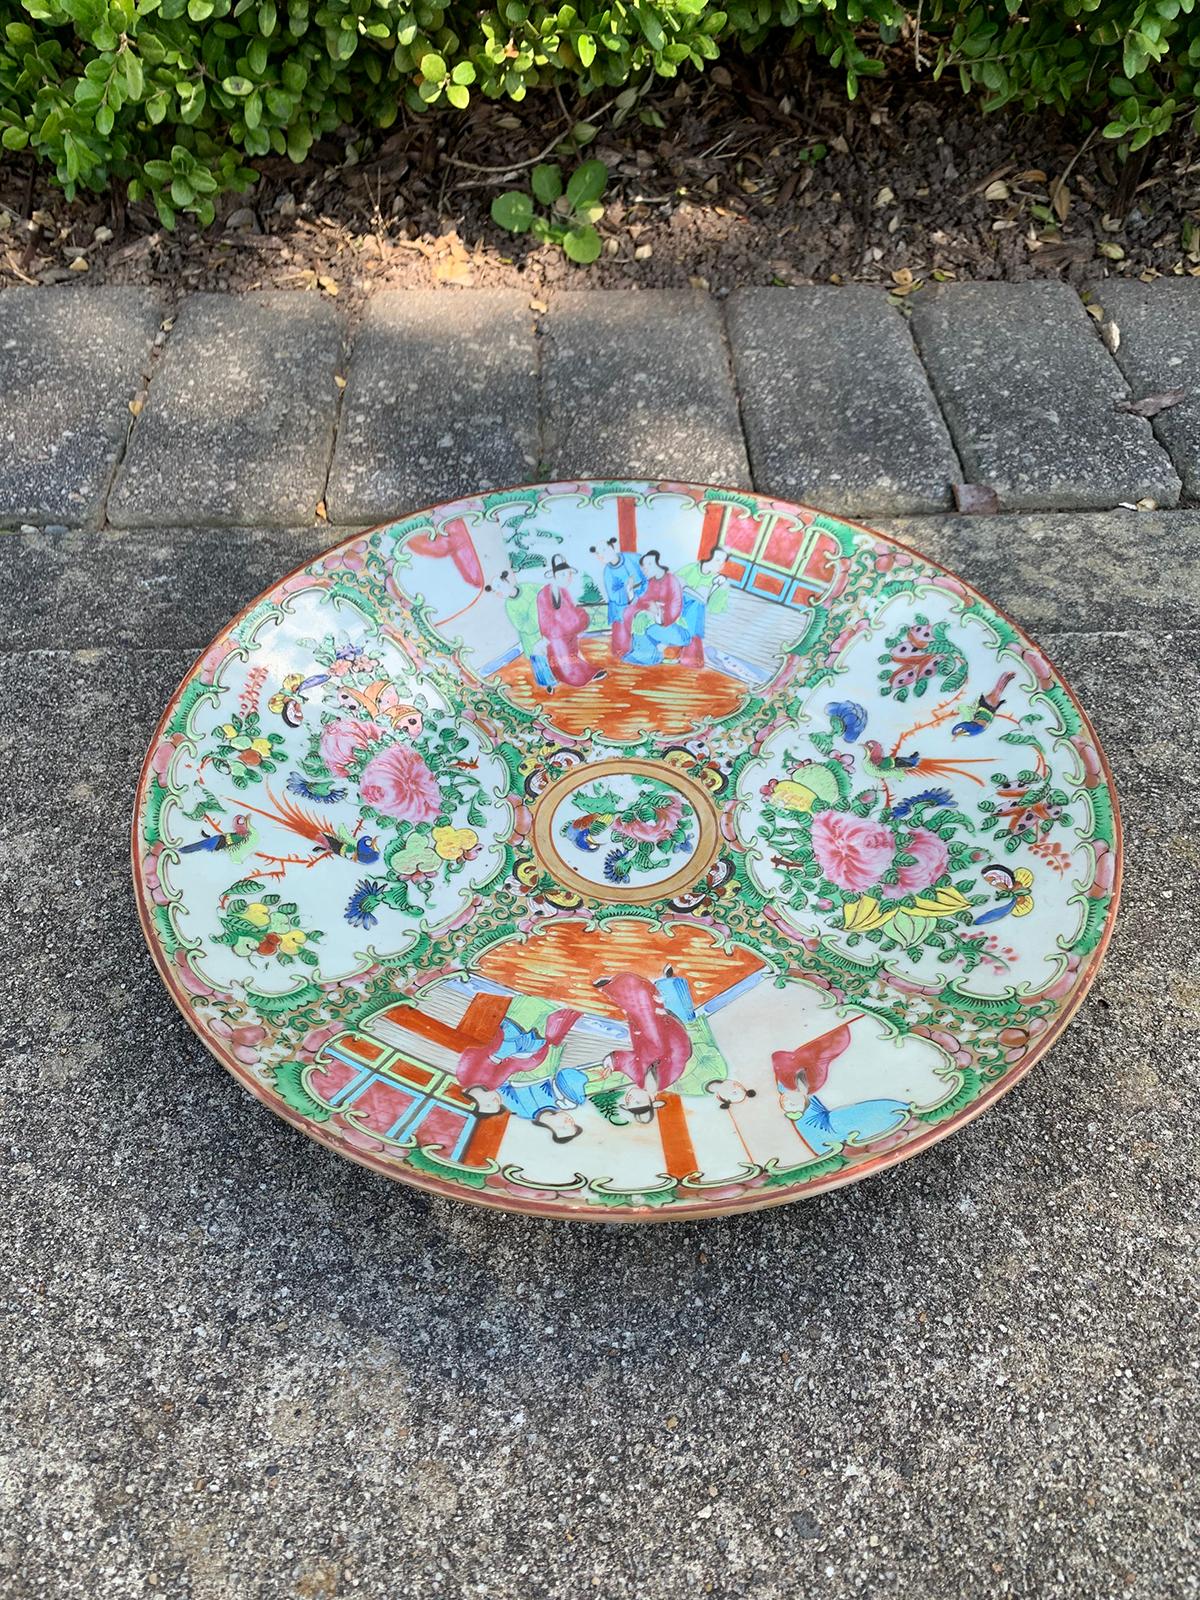 19th-20th Century Chinese Rose Medallion Porcelain Charger 4